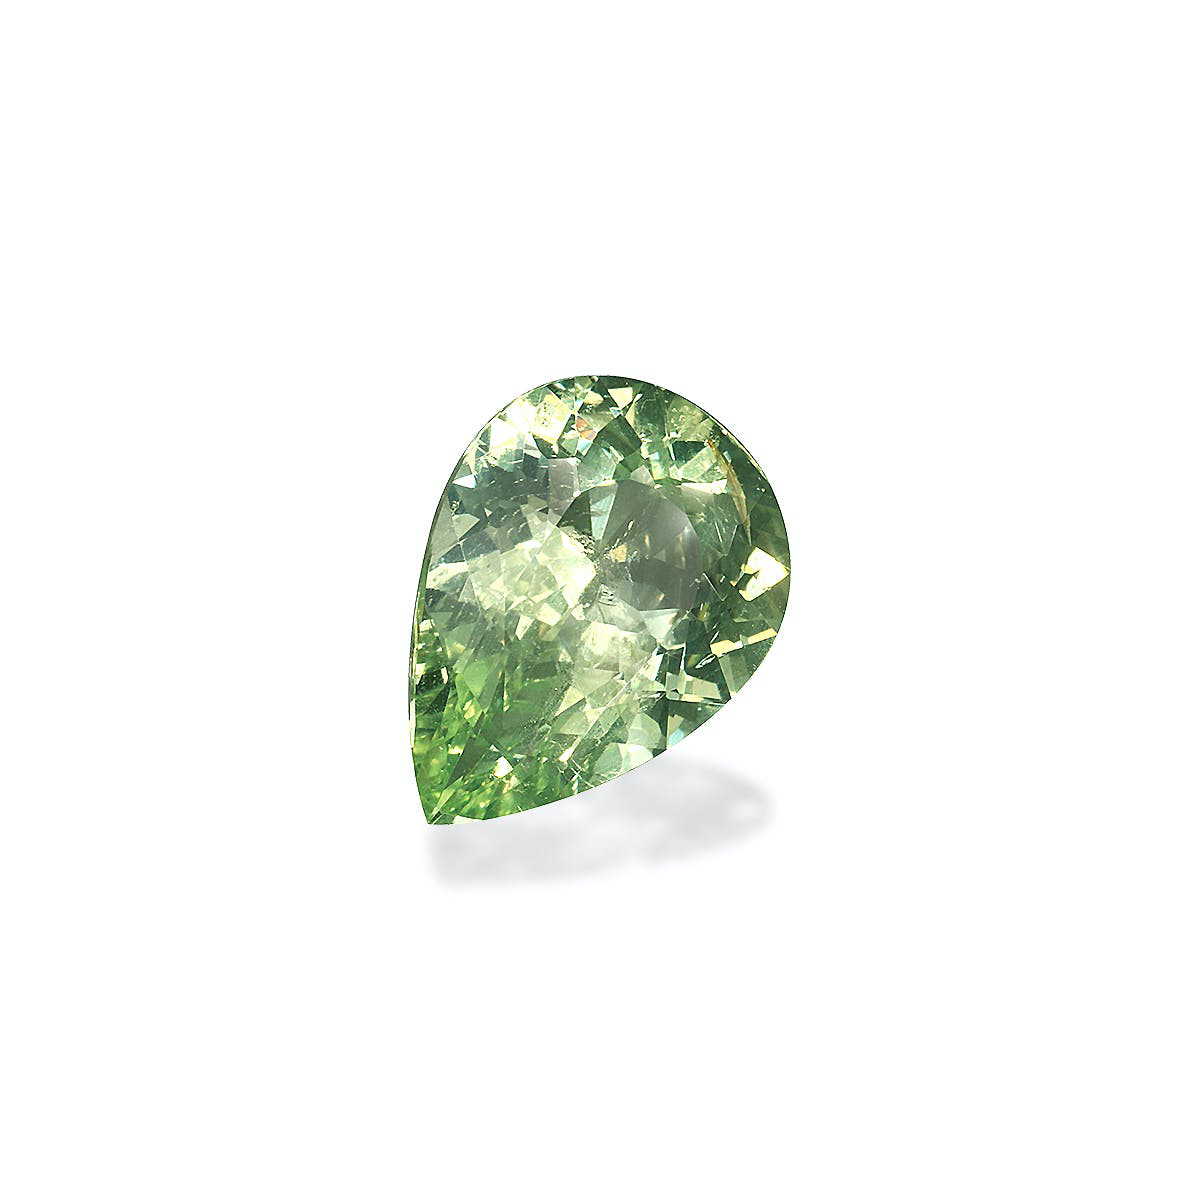 Picture of Pale Green Chrysoberyl 5.35ct (CB0015)